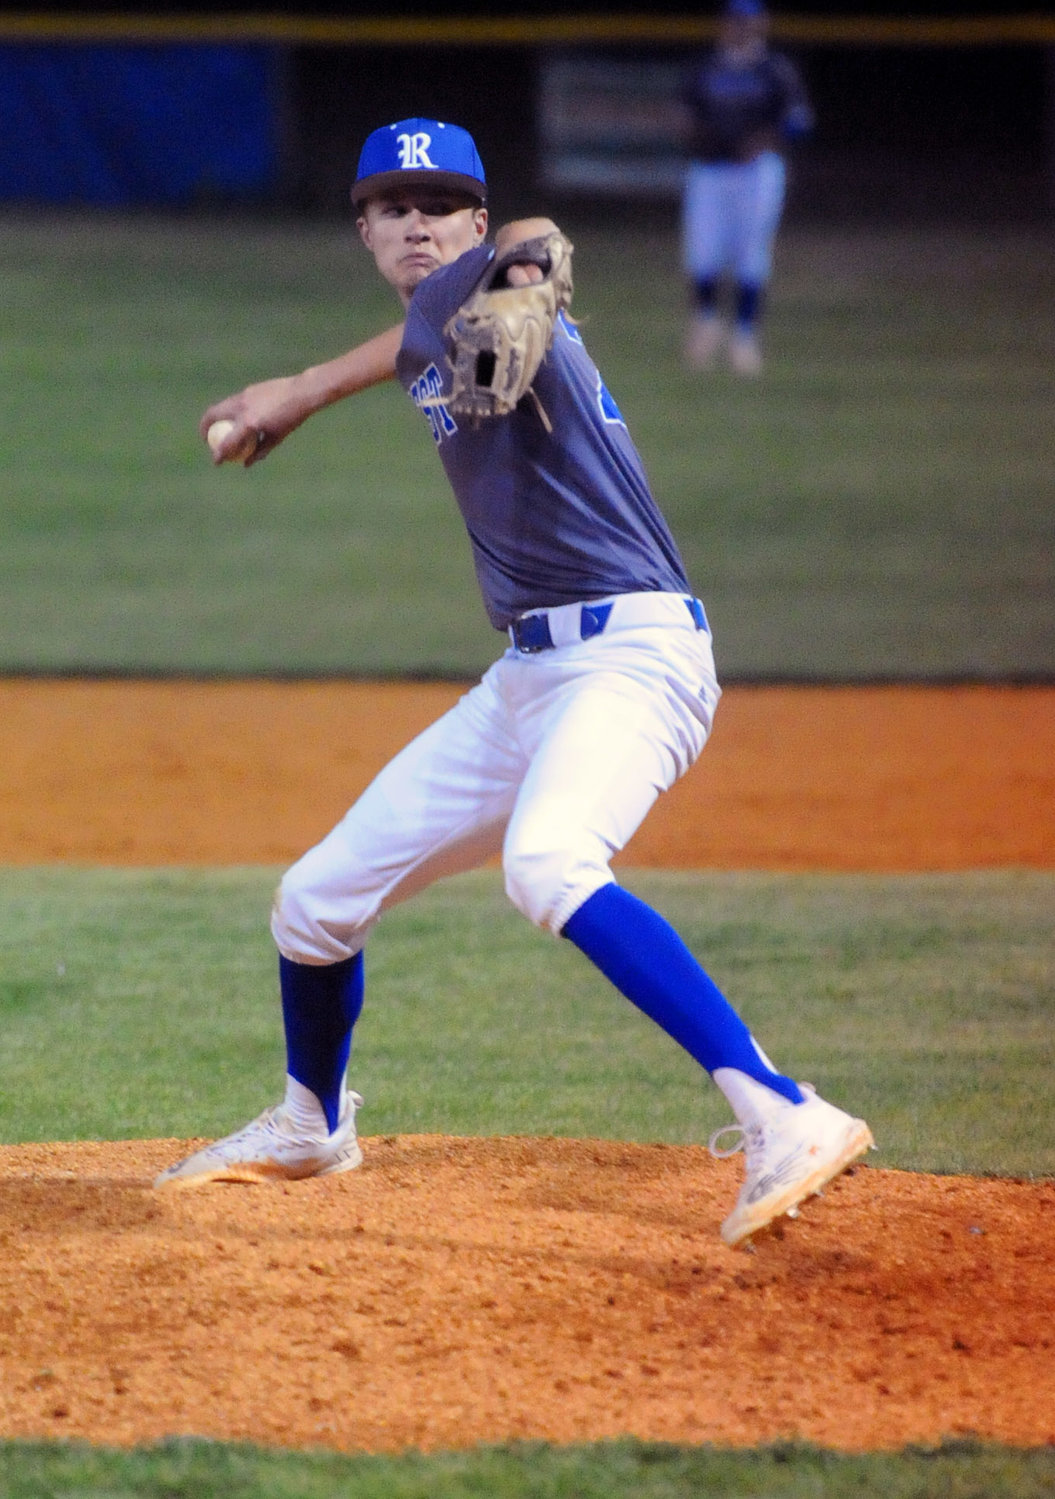 Lampley worked several innings in relief against Giles County recently.